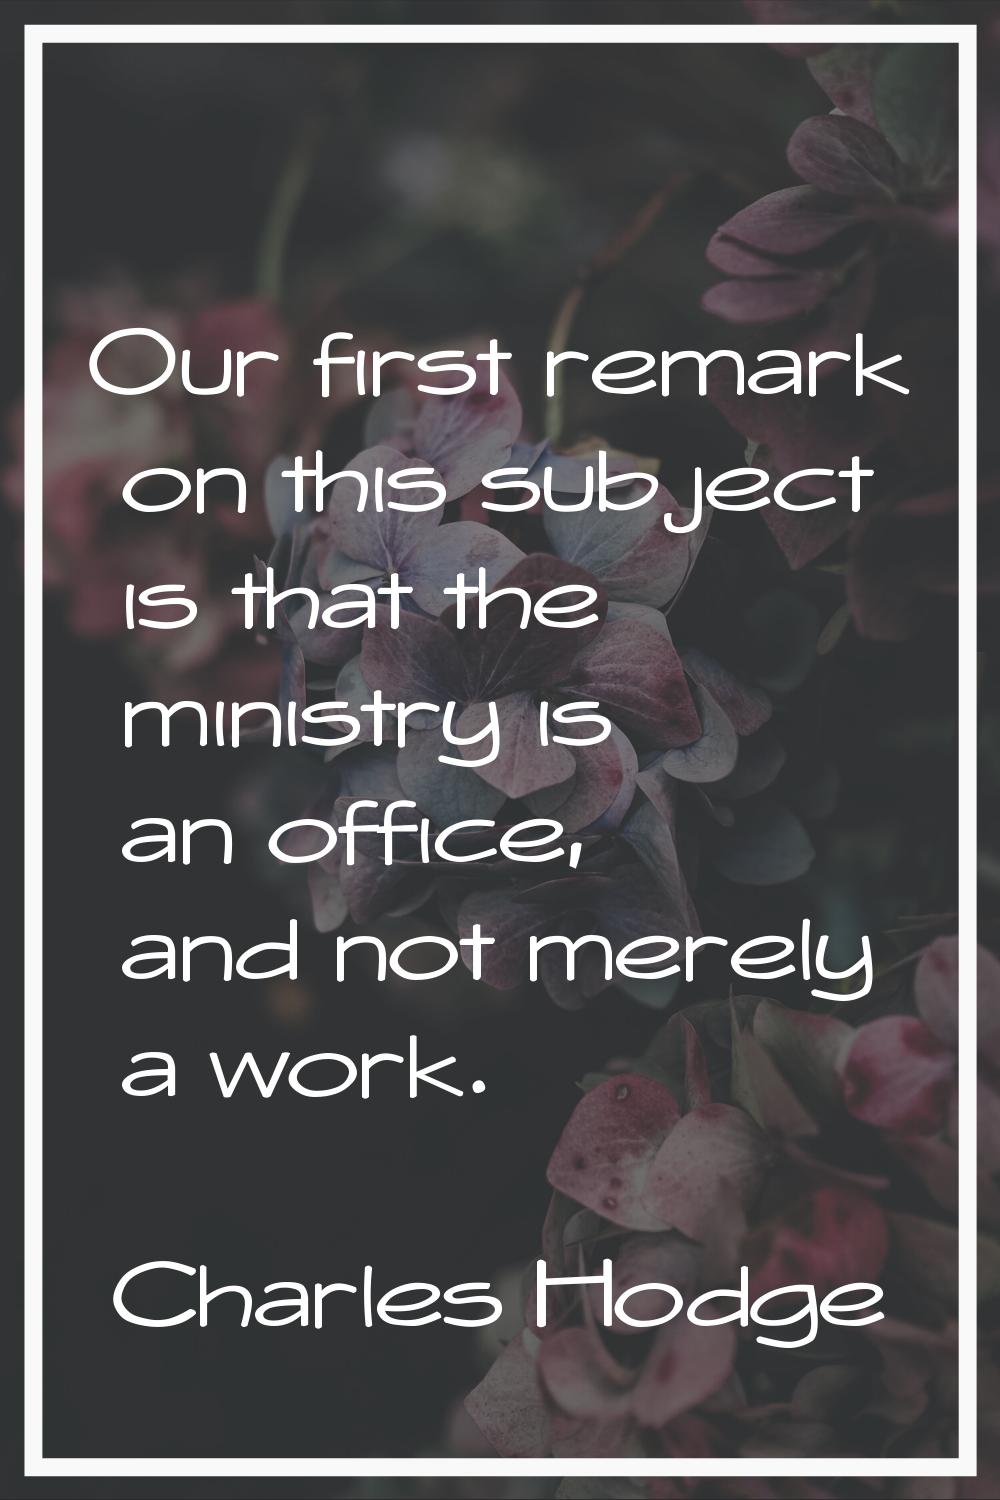 Our first remark on this subject is that the ministry is an office, and not merely a work.